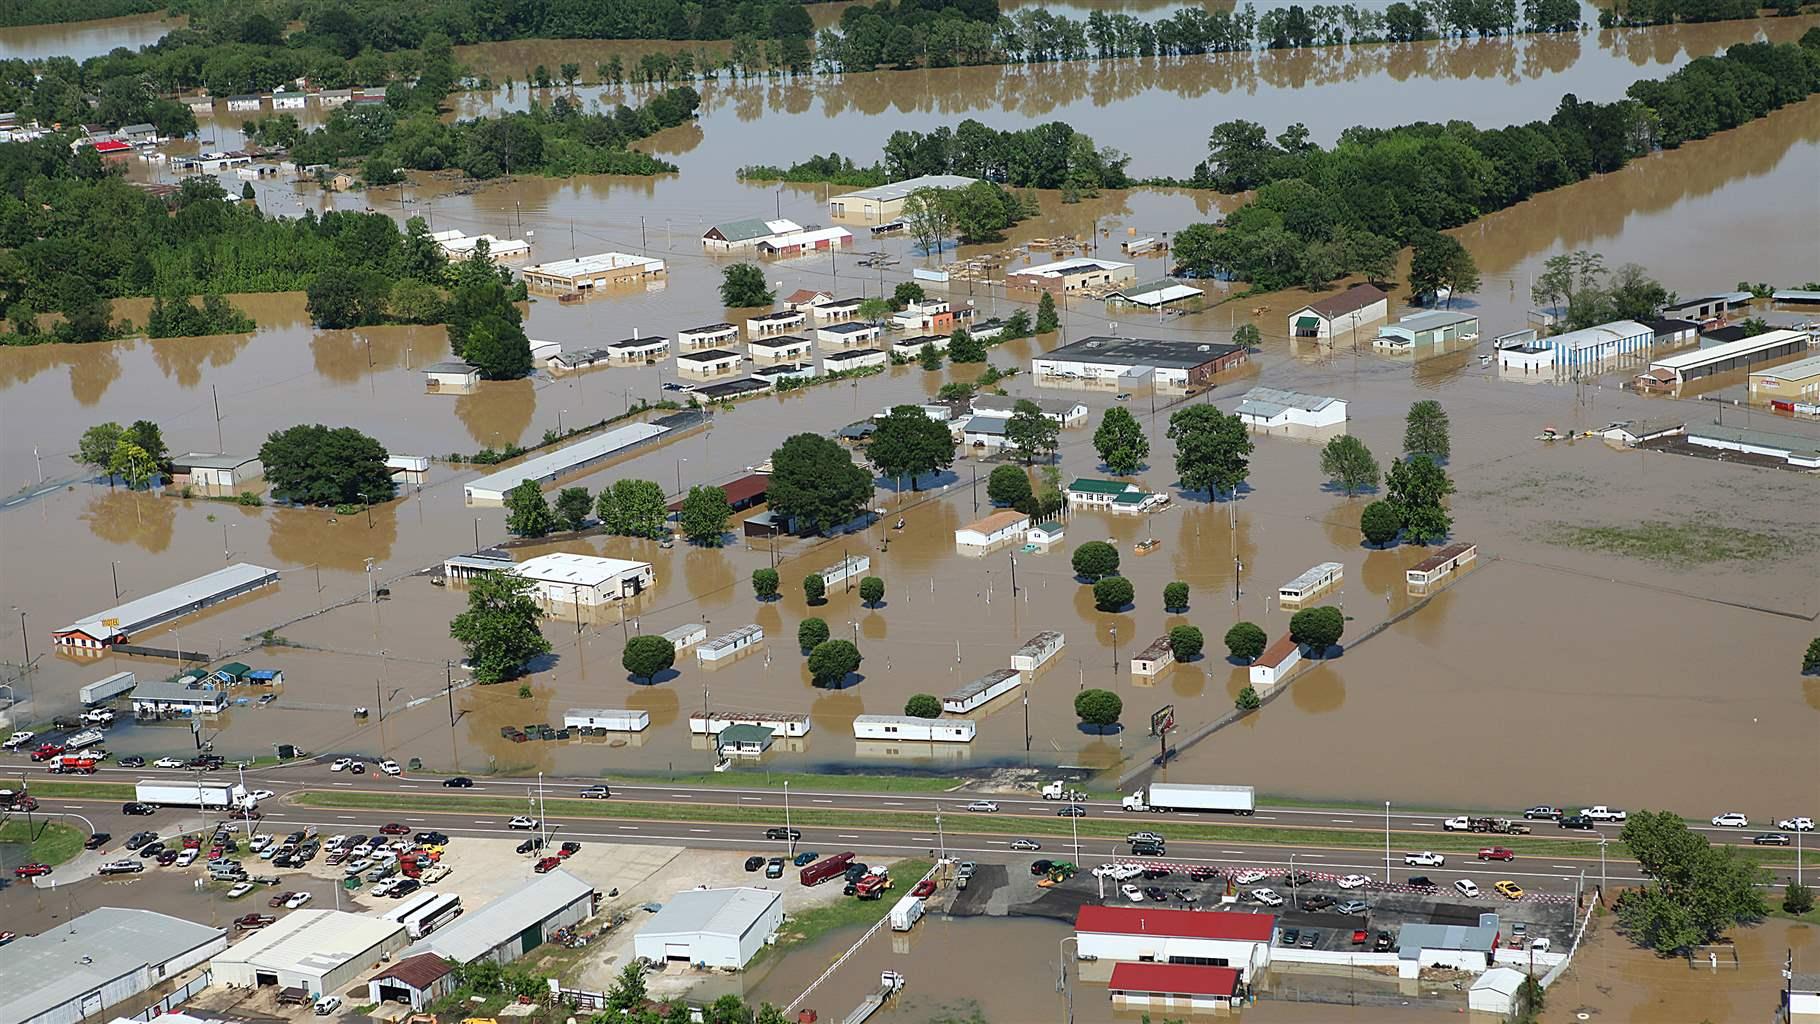 FEMA is completing aerial preliminary damage assessments over Tennessee following the severe storms and floods that have damaged or destroyed homes and businesses in April 2010